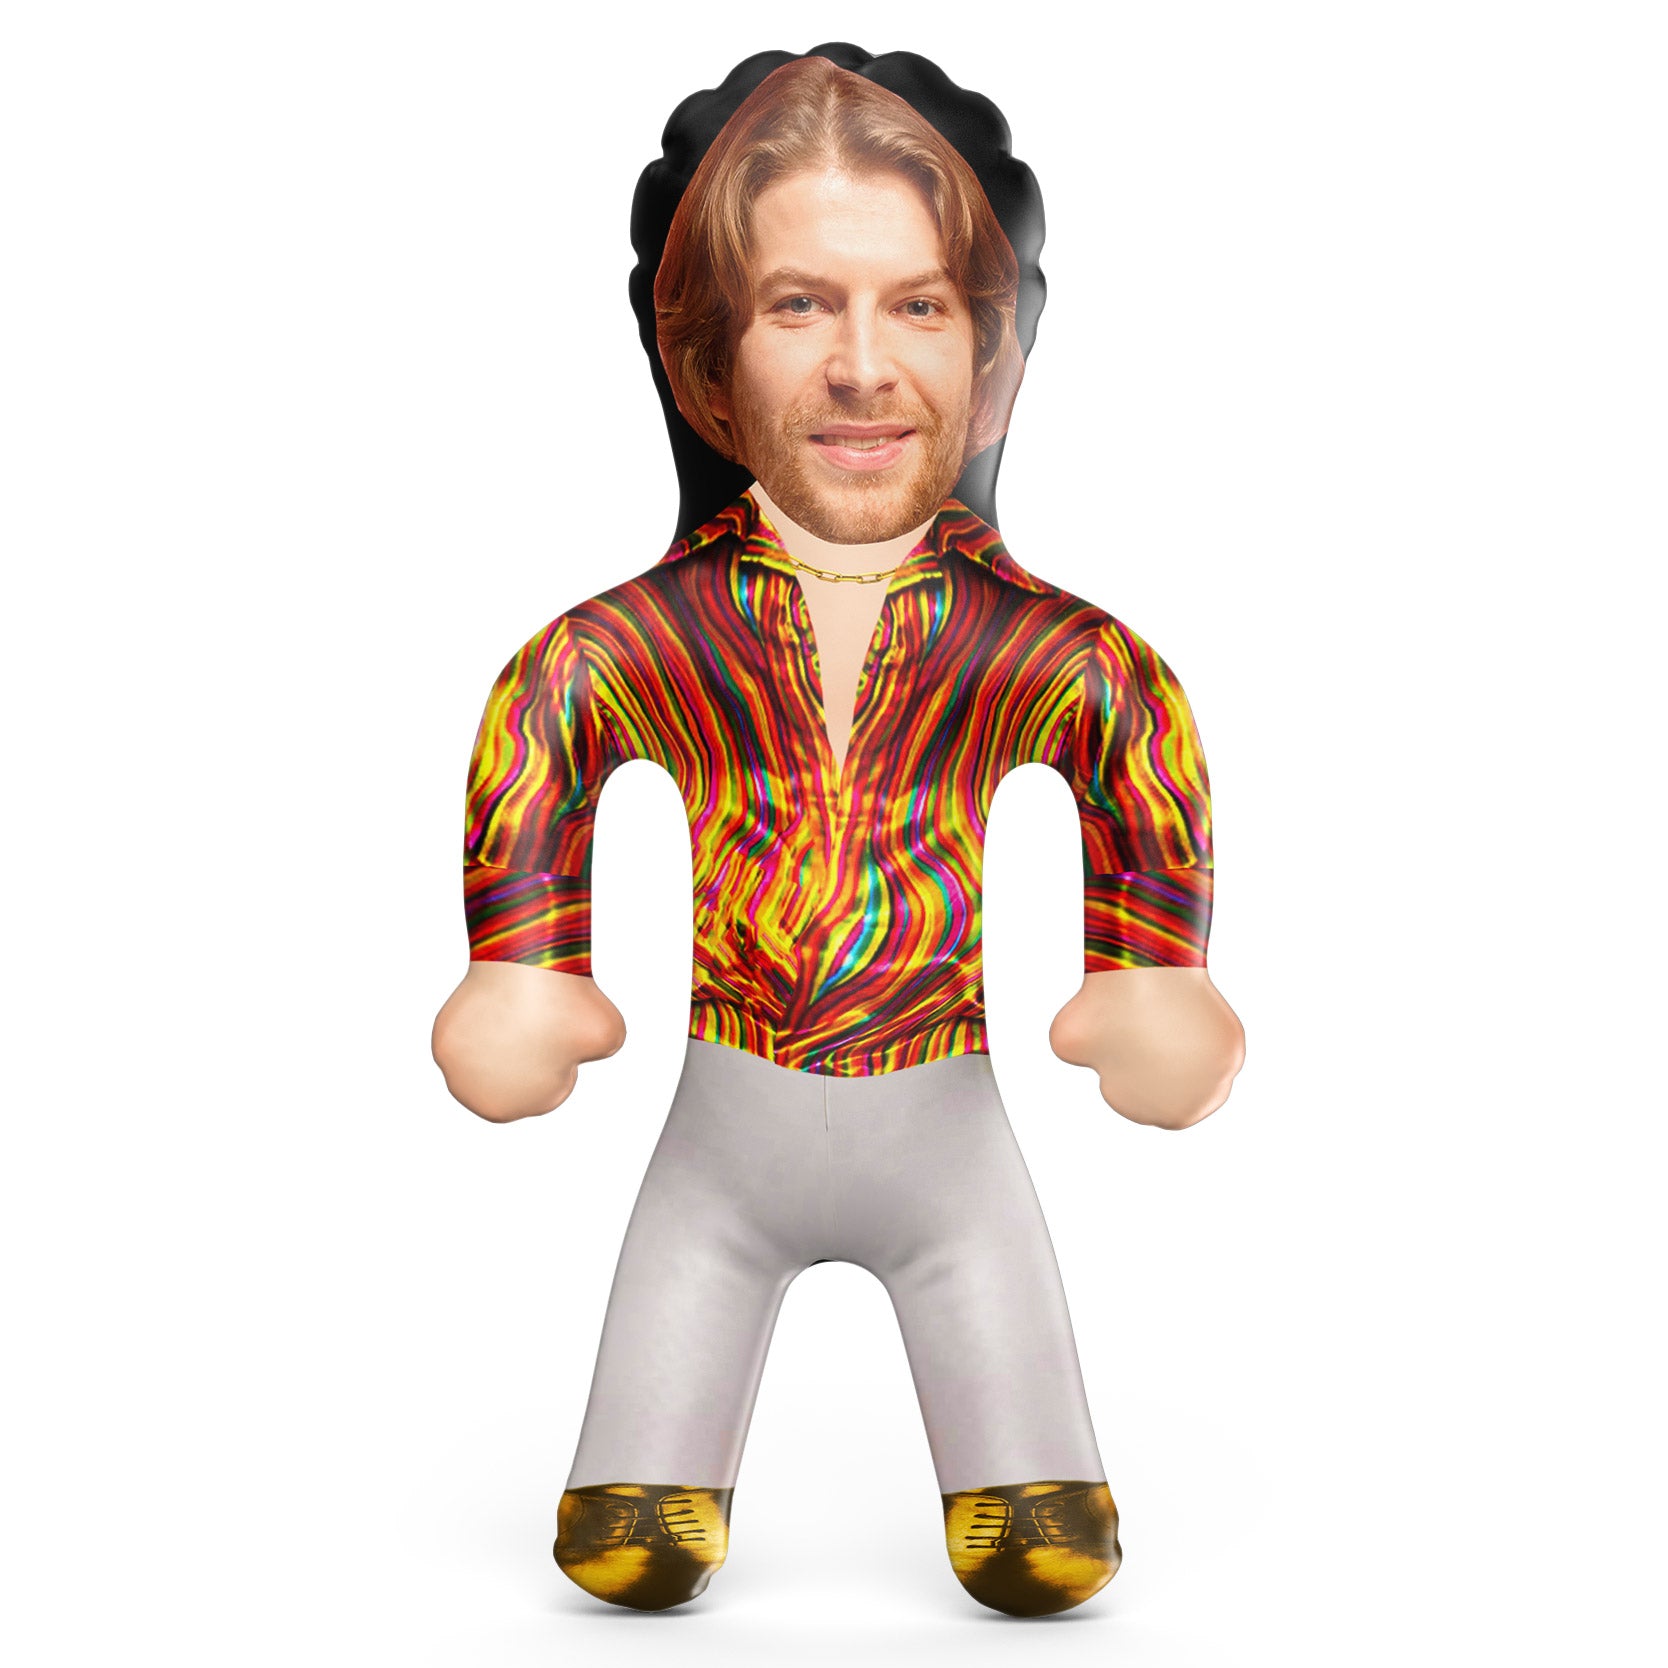 1970s Disco Guy Inflatable Doll - 1970s Disco Guy Blow Up Doll